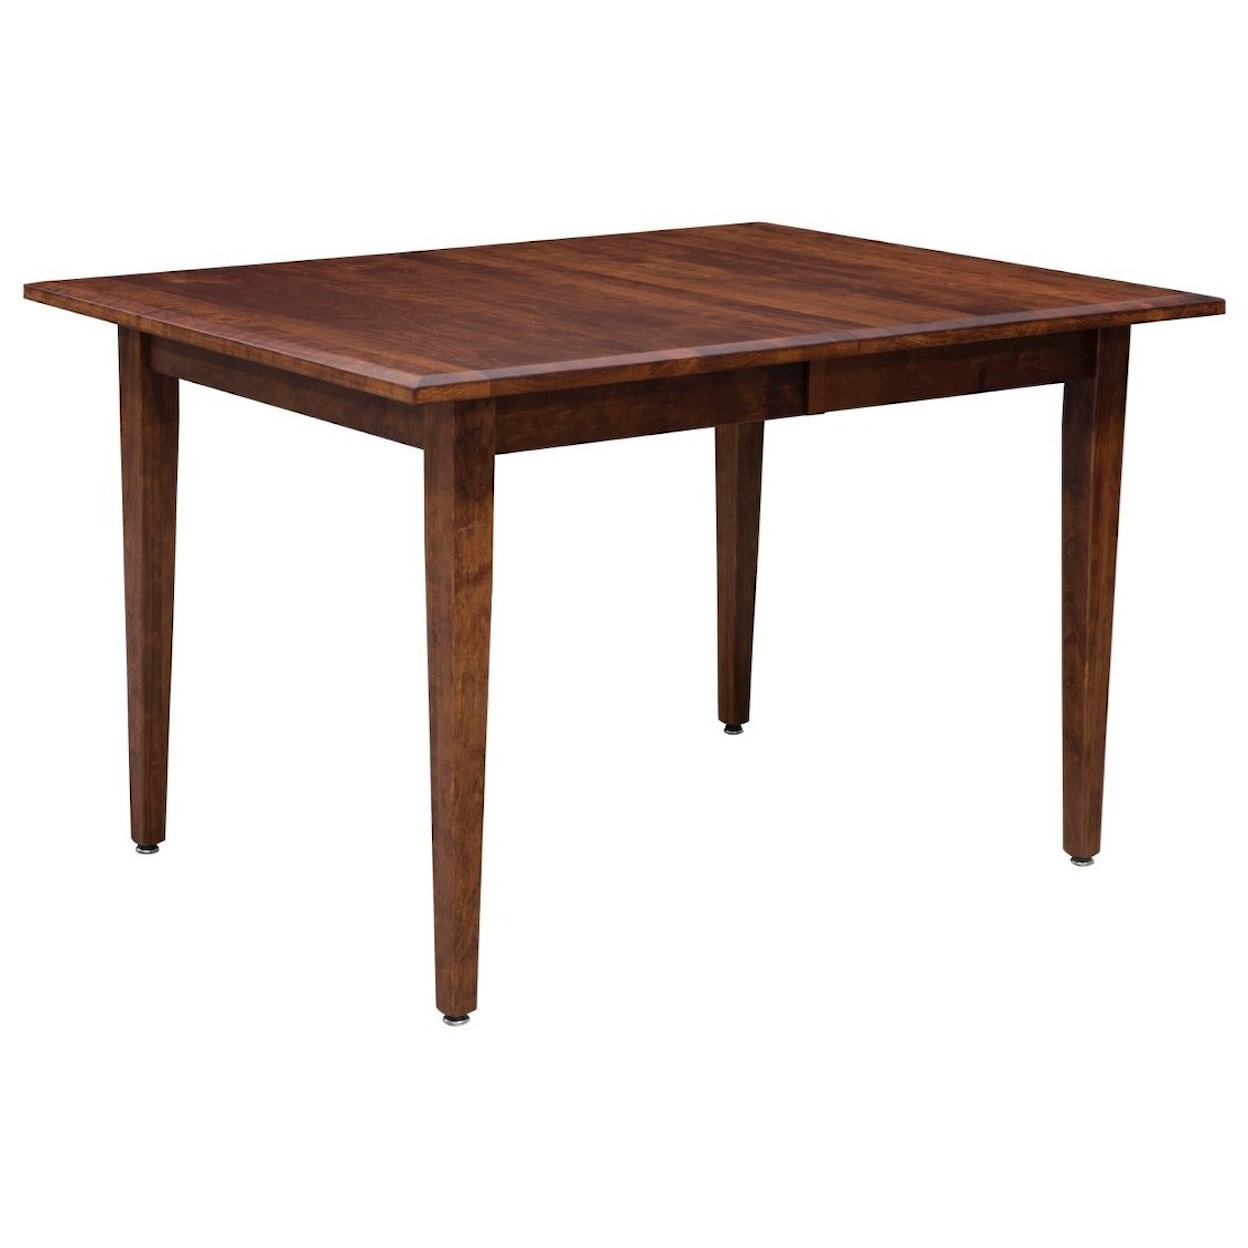 Trailway Wood Santa Monica Table and Chair Set with Bench